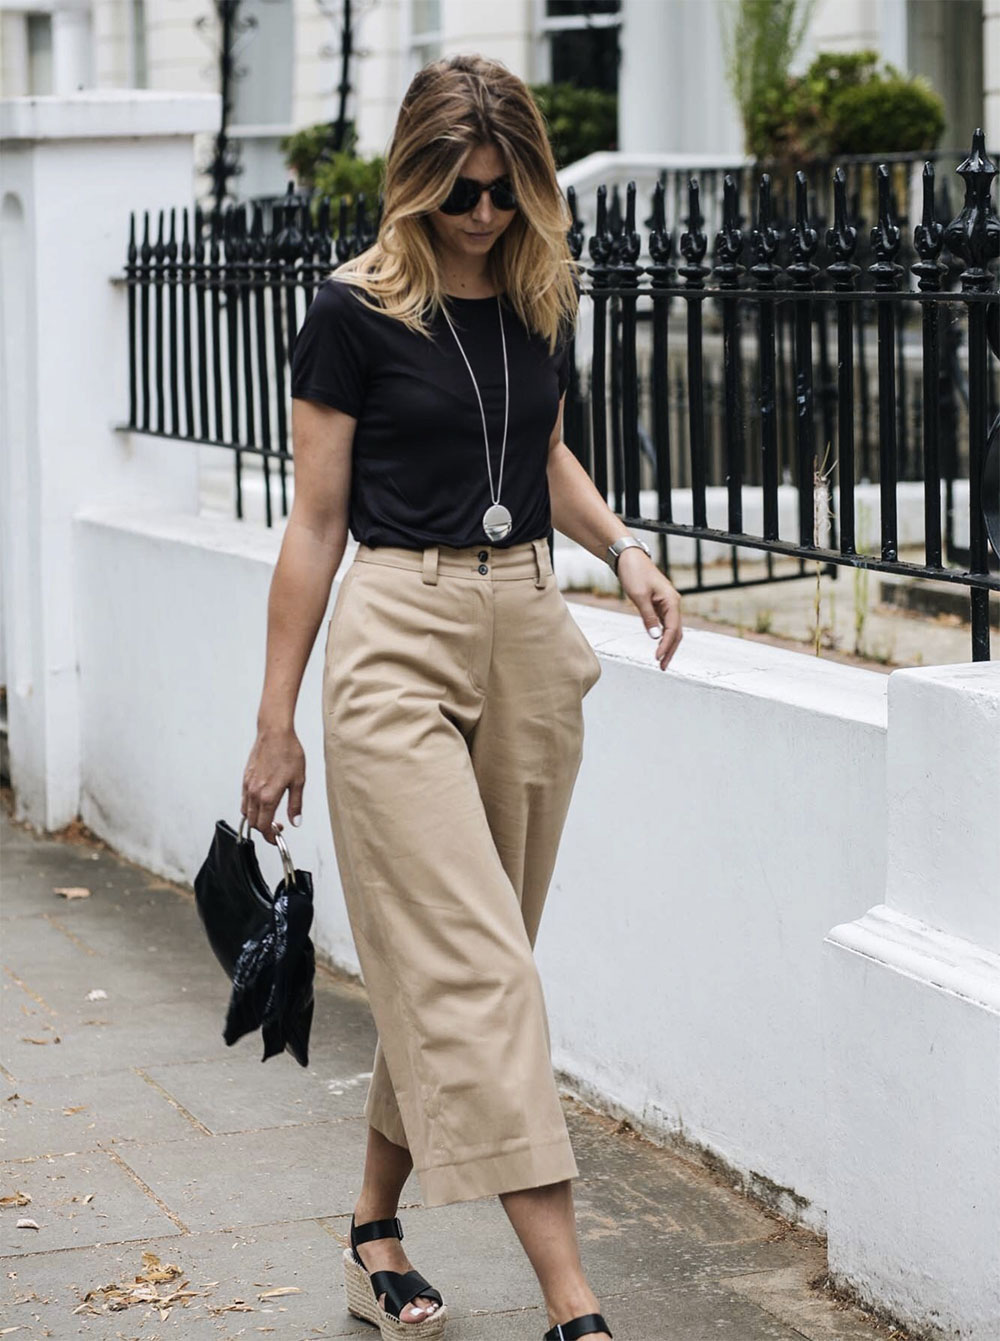 How to Look Stylish with Wide-Leg Trousers - Outfitmag.com